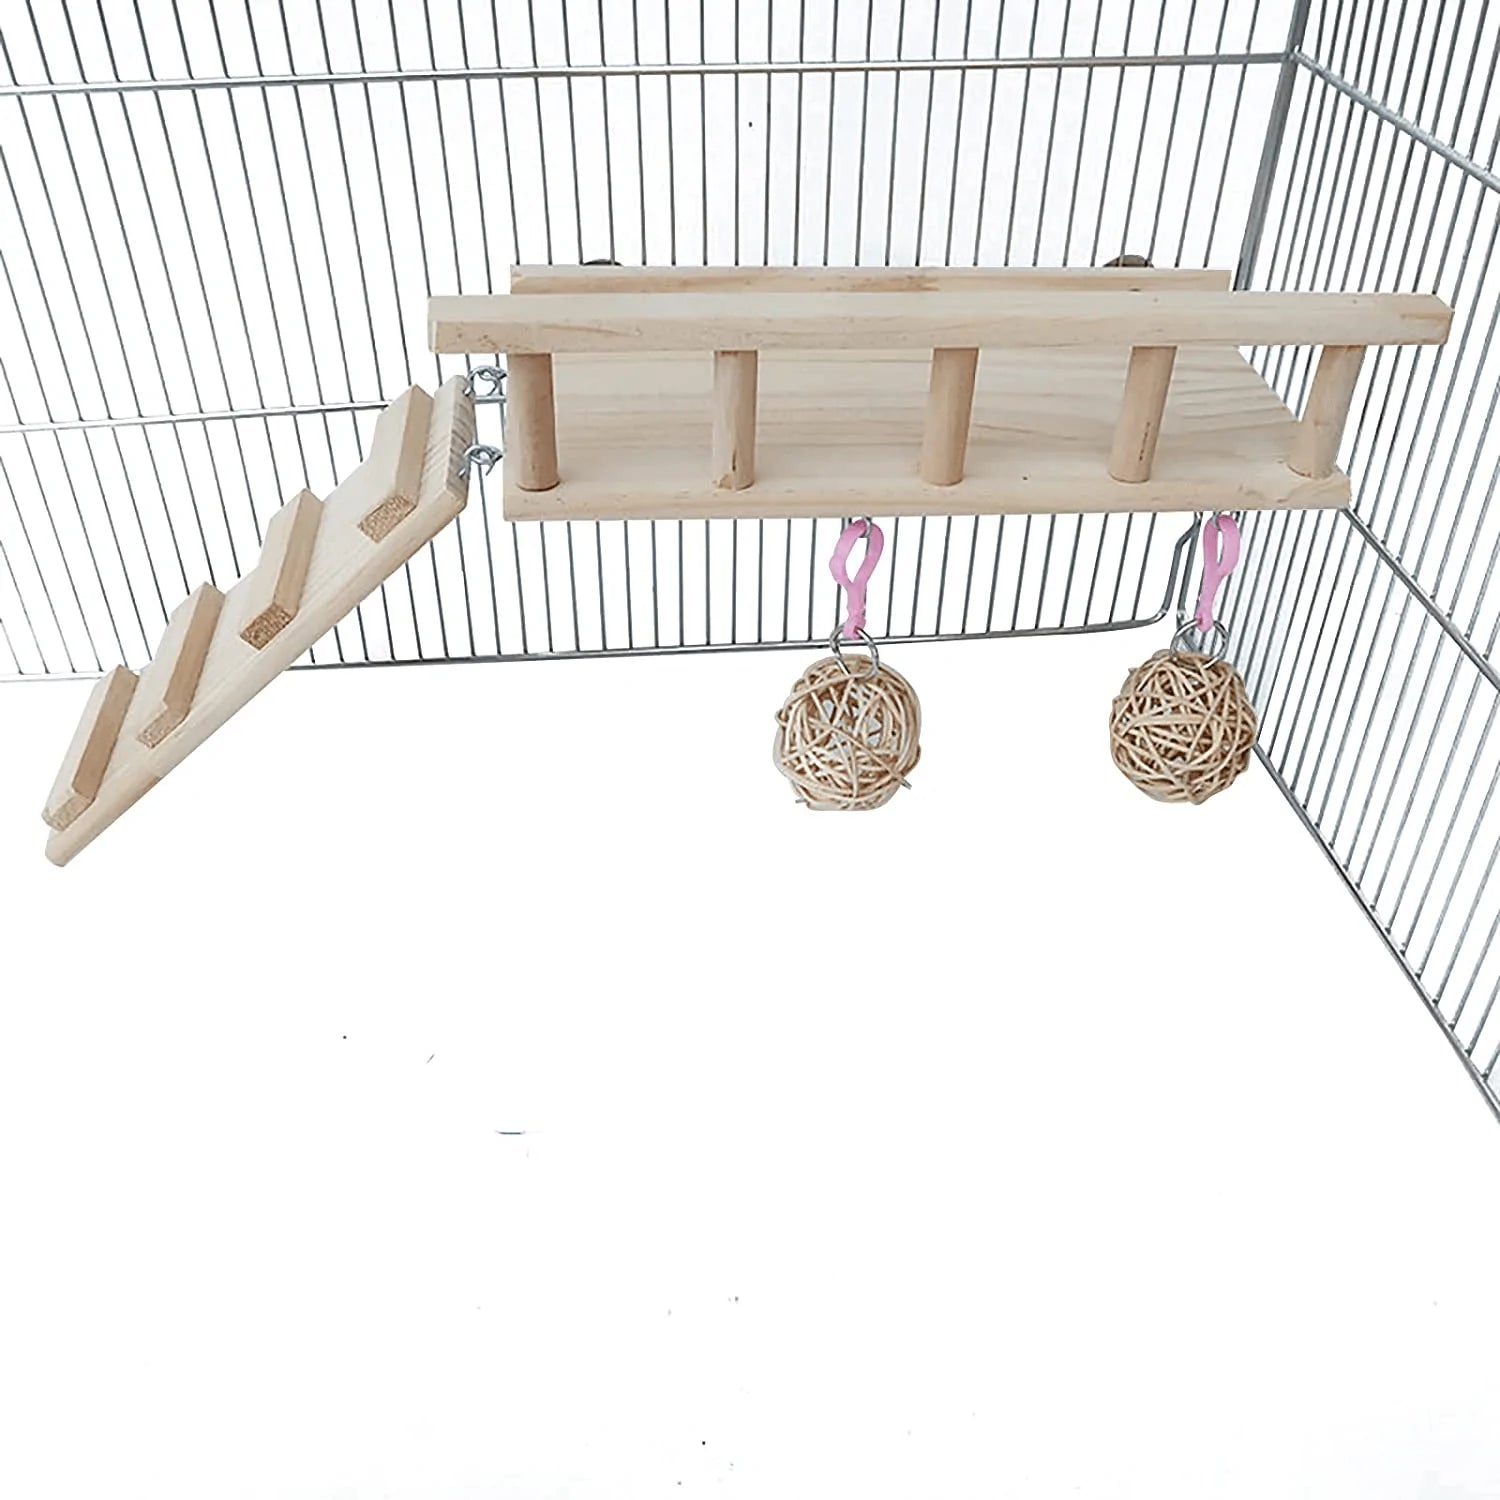 ZARYIEEO Bird Perches Cage Toys Set, Wooden Play Stand Perch for Totoro, Bunny, Squirrel, Guinea Pig, Hamster, Bird, Rat, Small Animals Play Gyms Stands with Climbing Ladder and Rattan Balls